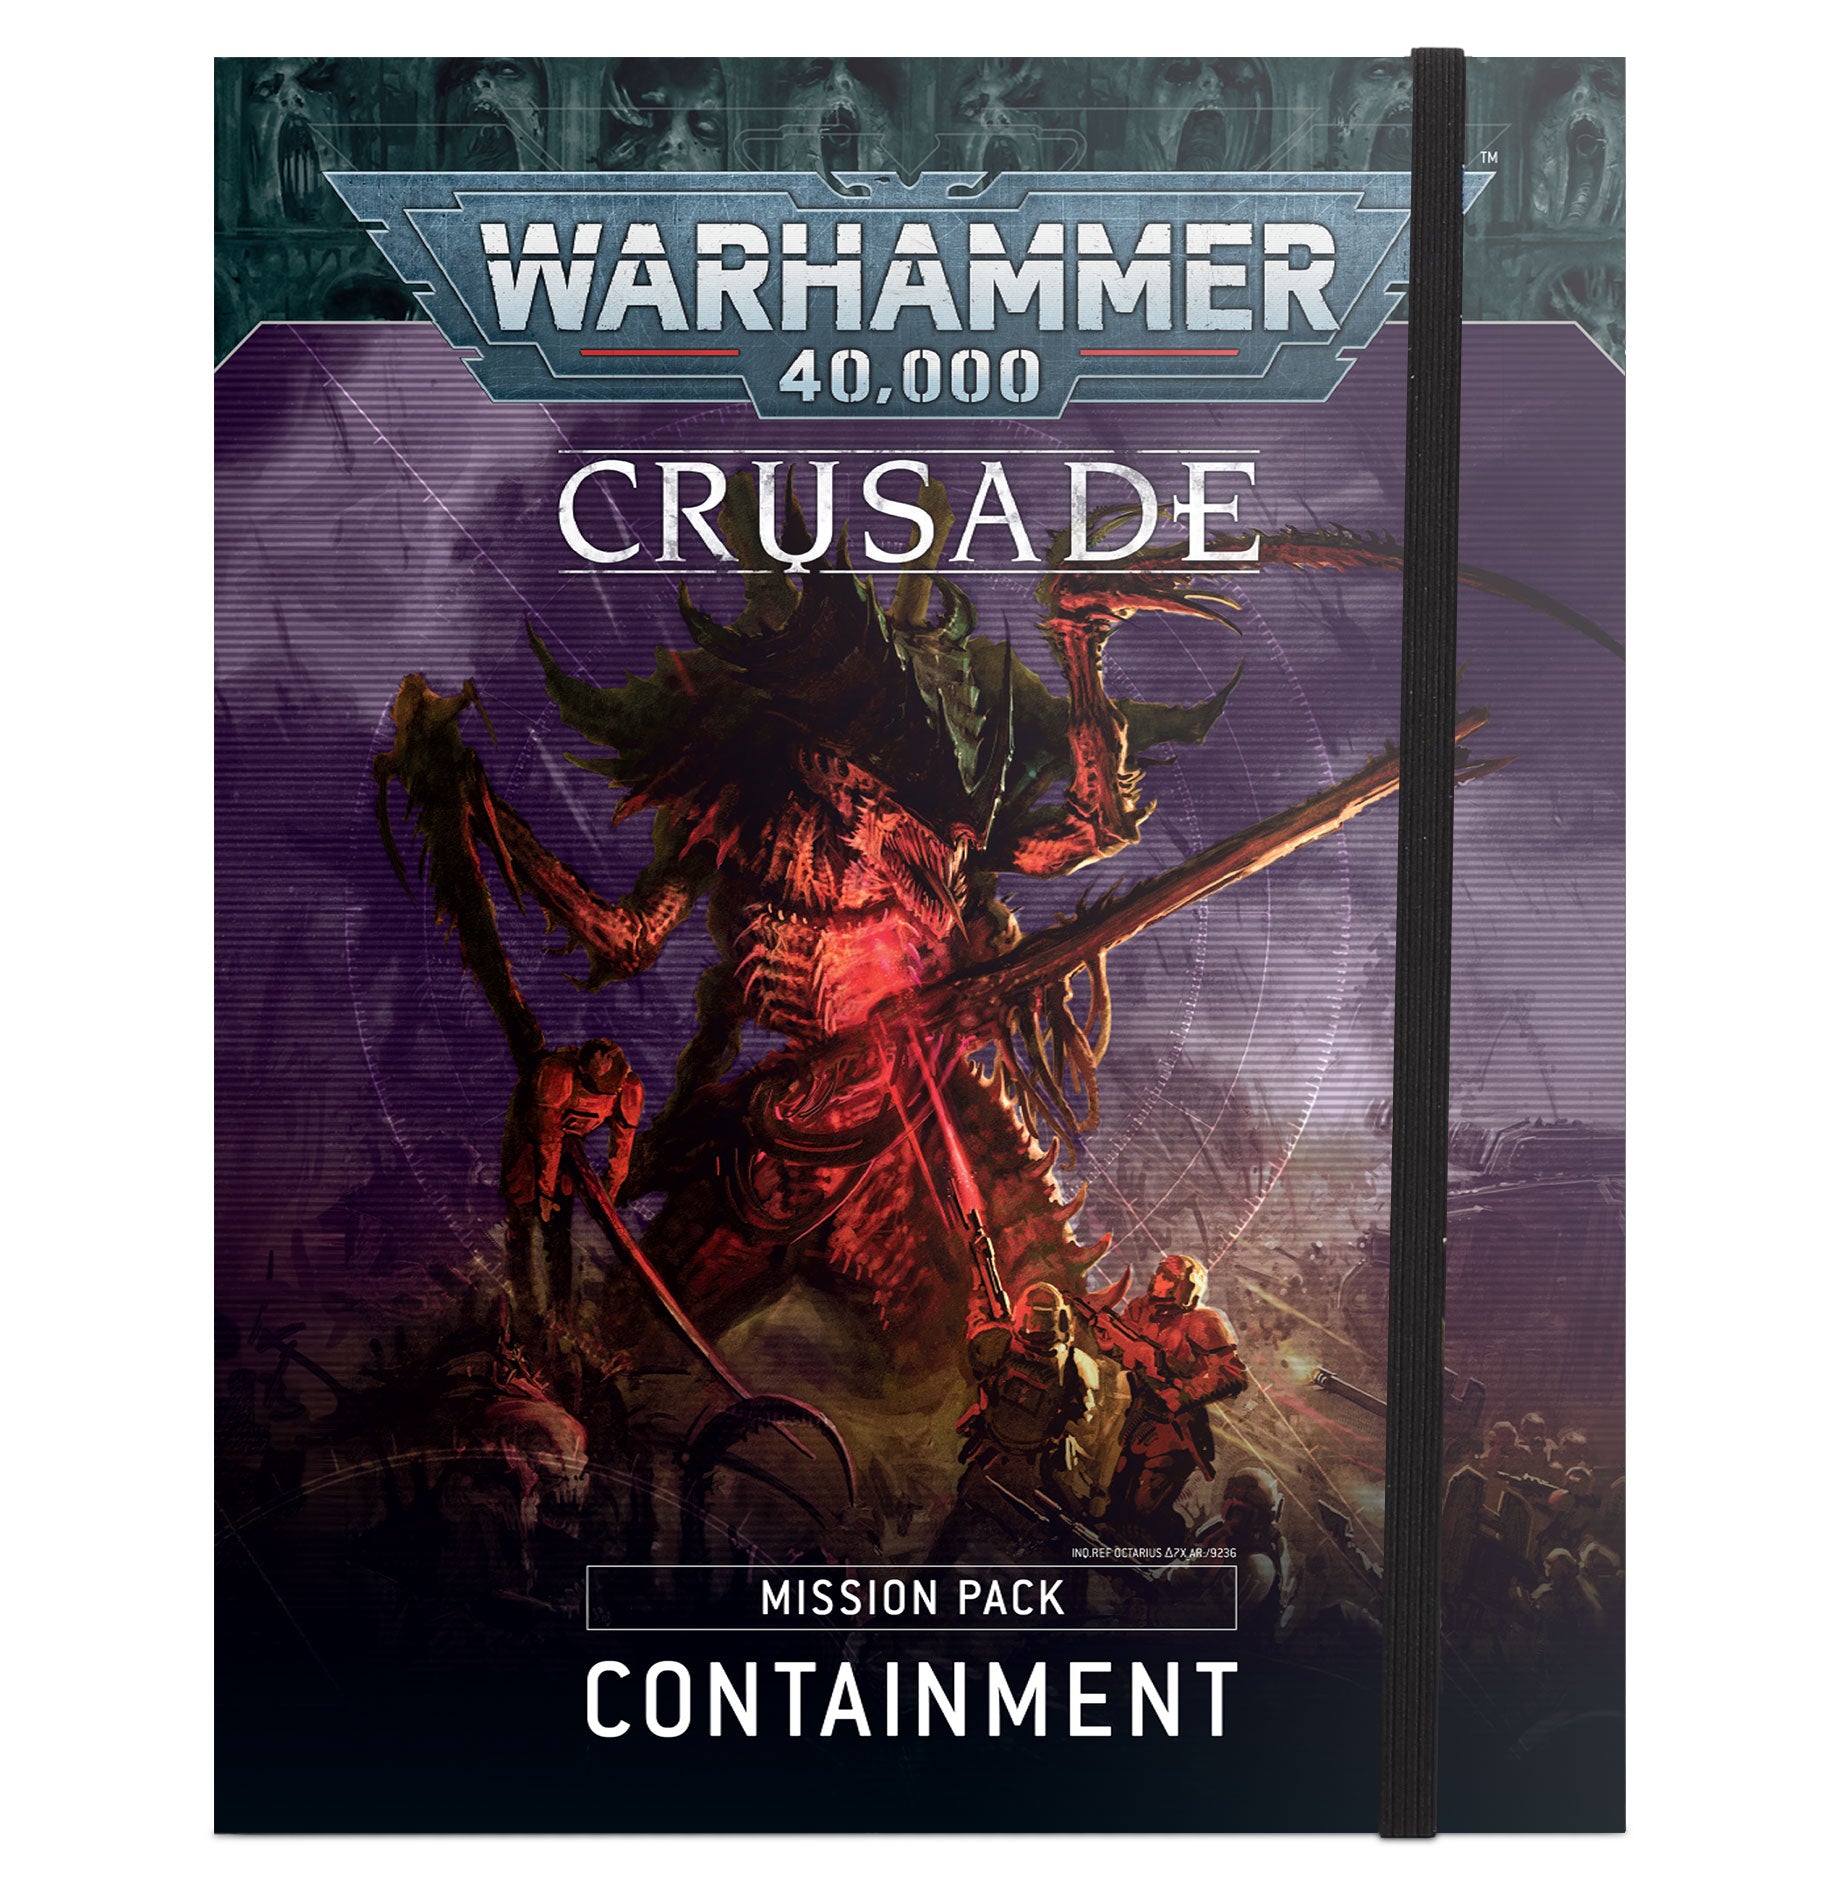 Warhammer 40,000 Crusade Mission Pack: Containment